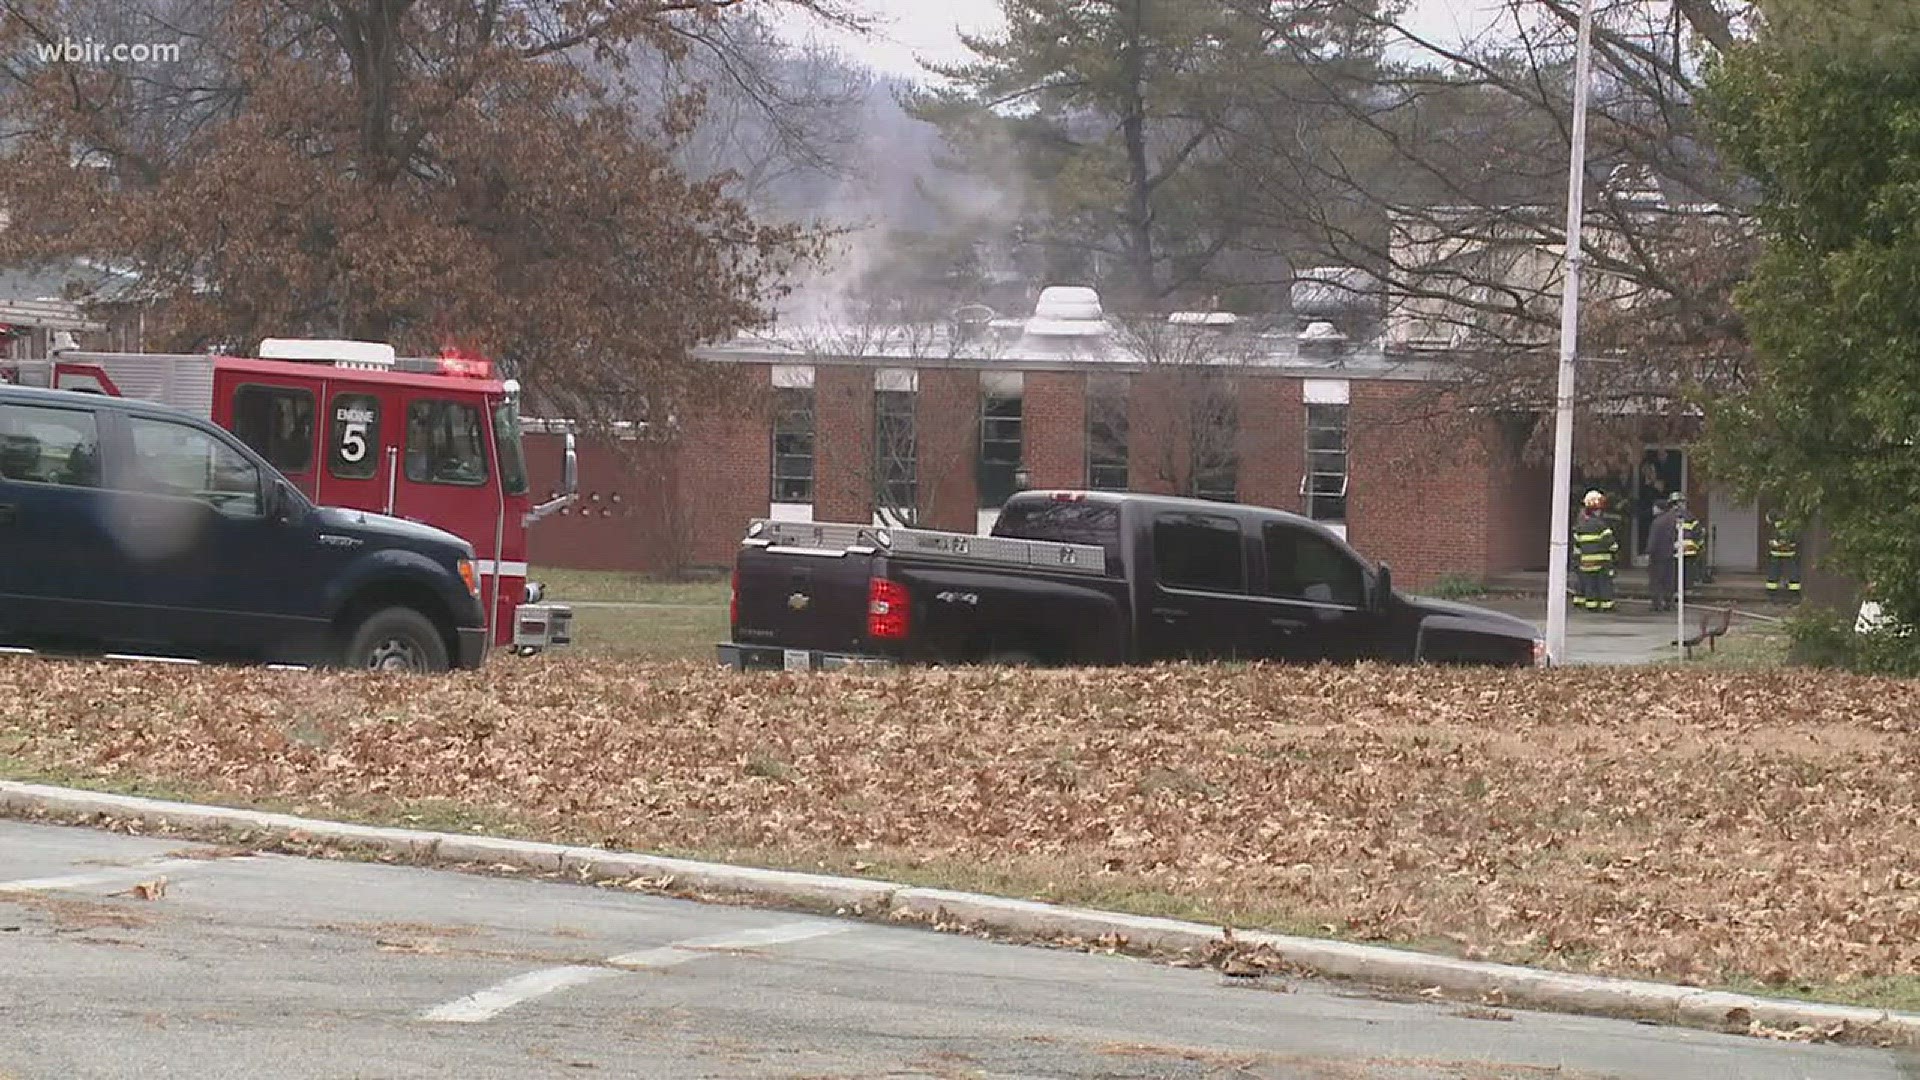 Jan. 8, 2018: Knoxville fire officials are looking for multiple juvenile suspects after someone started two fires on the Knoxville College campus.